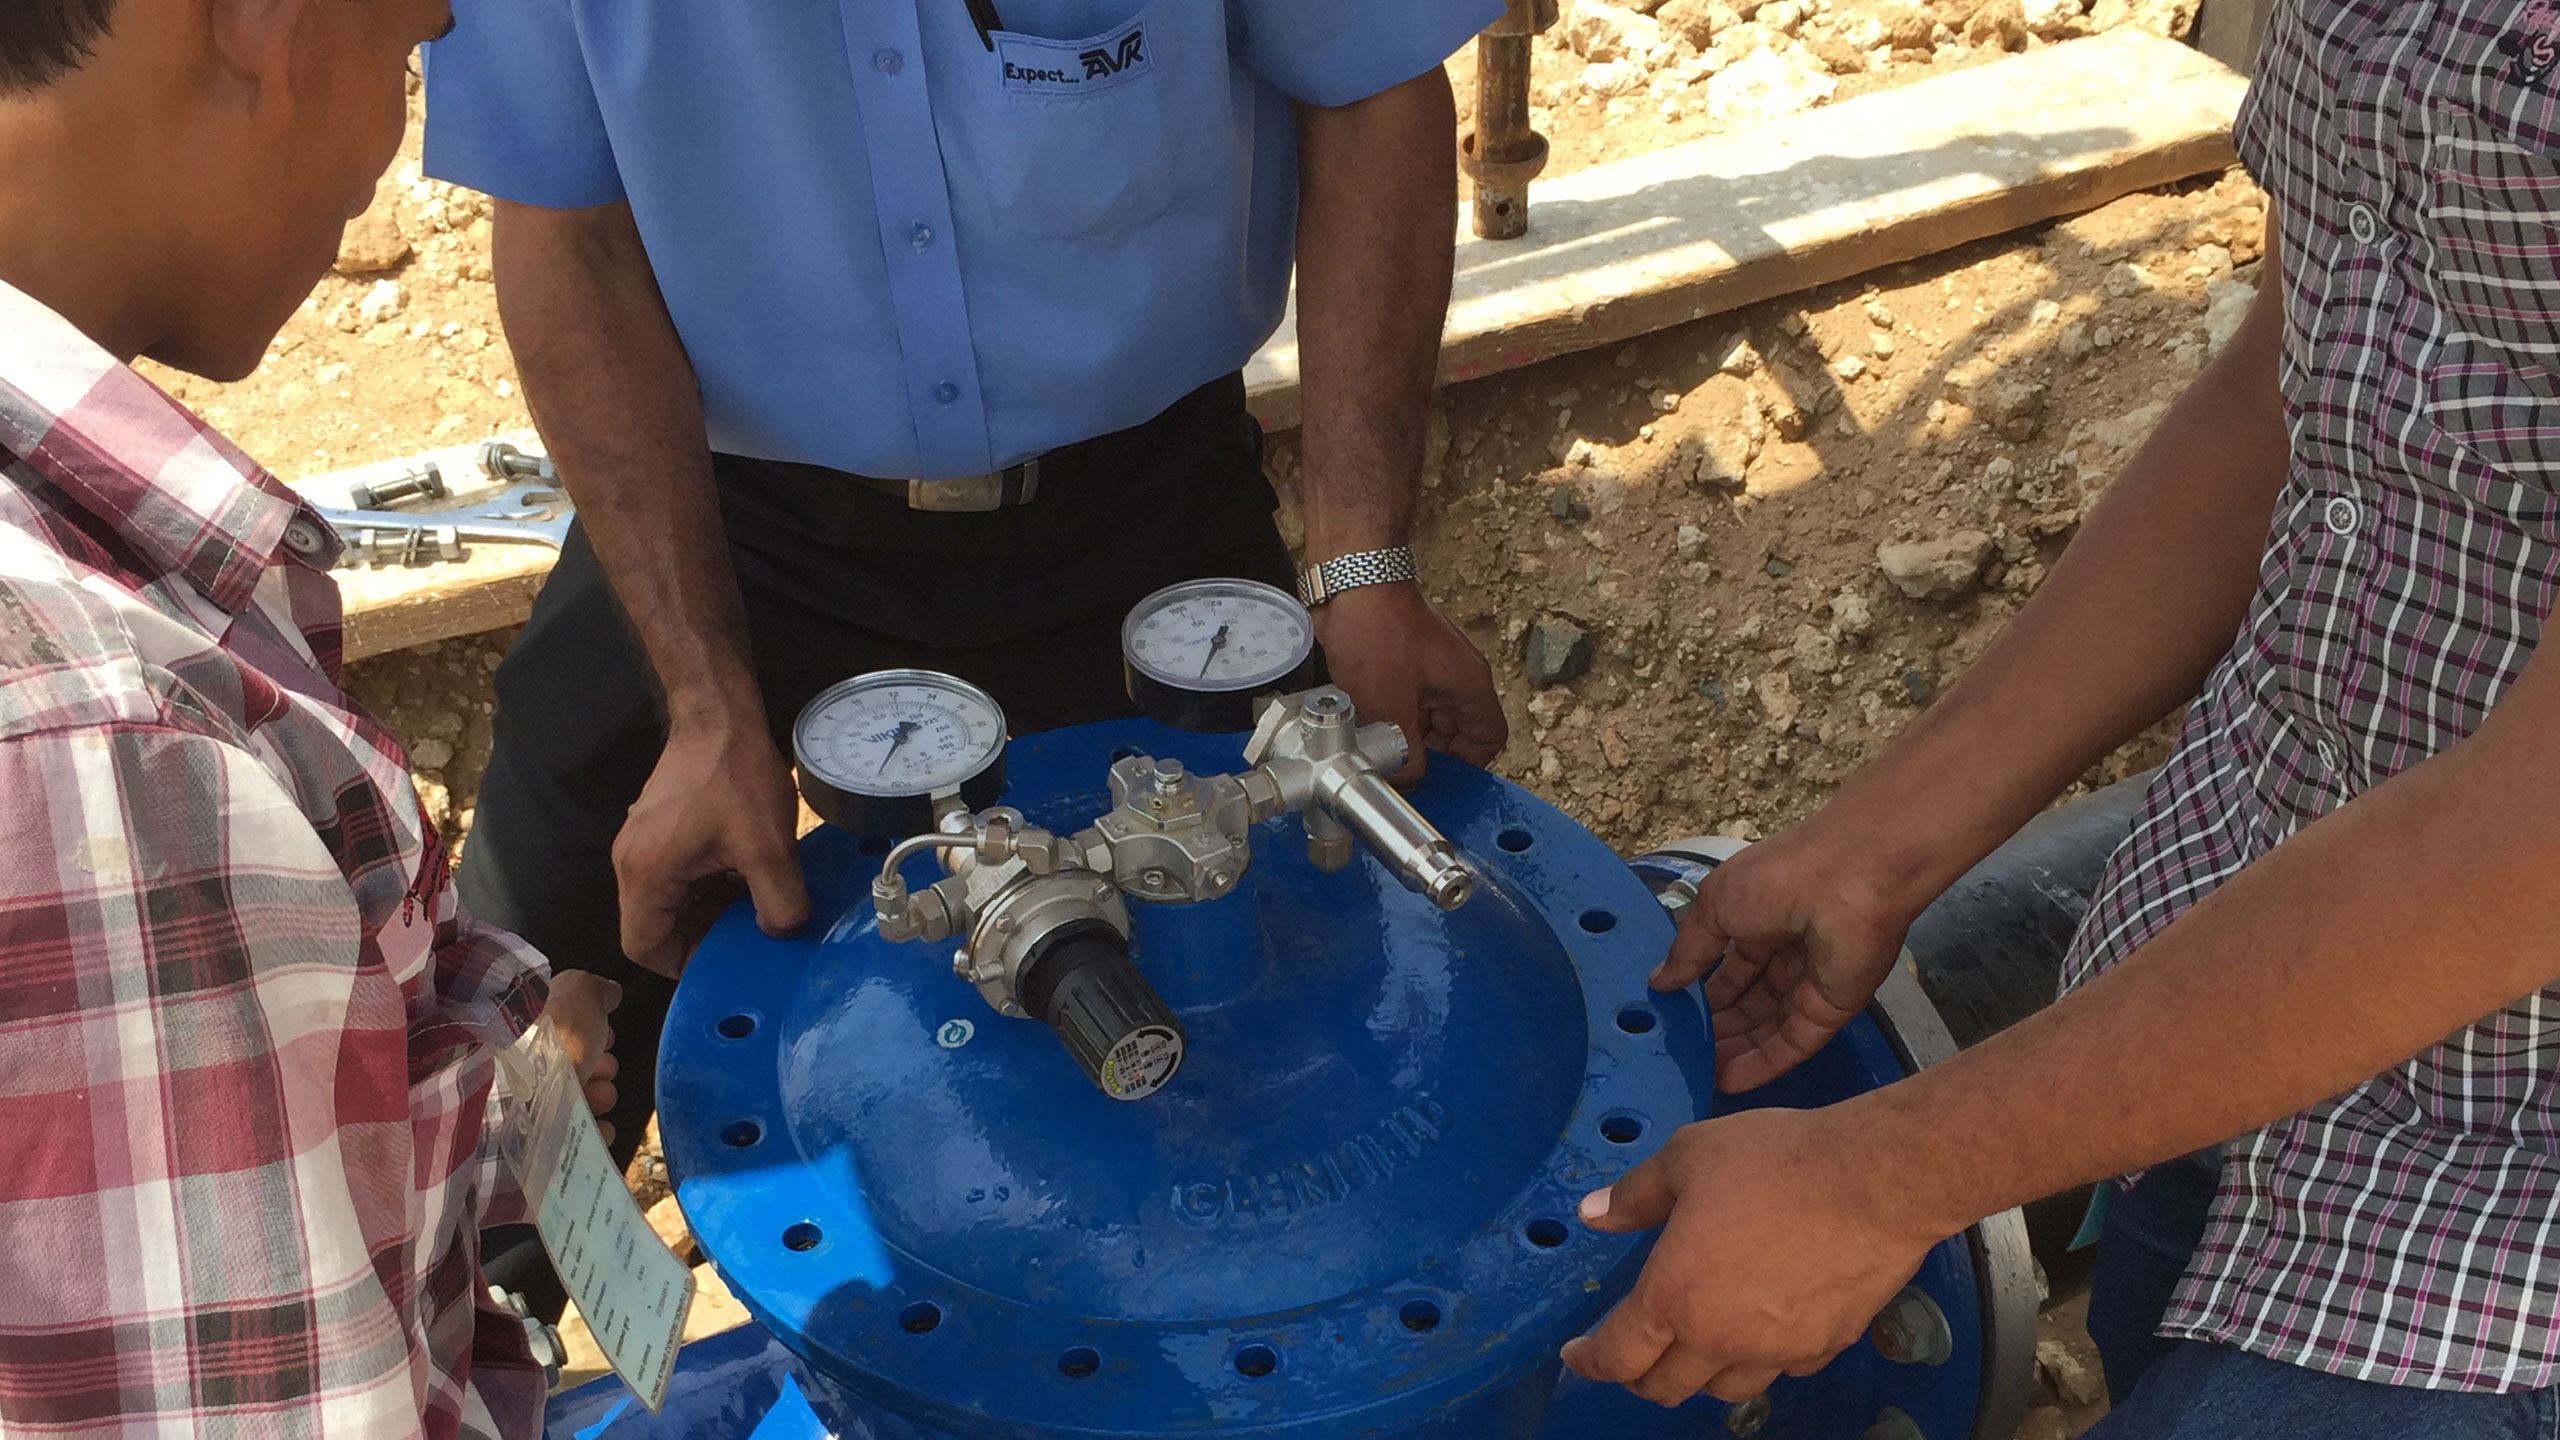 Installation of AVK control valve, close-up with hands